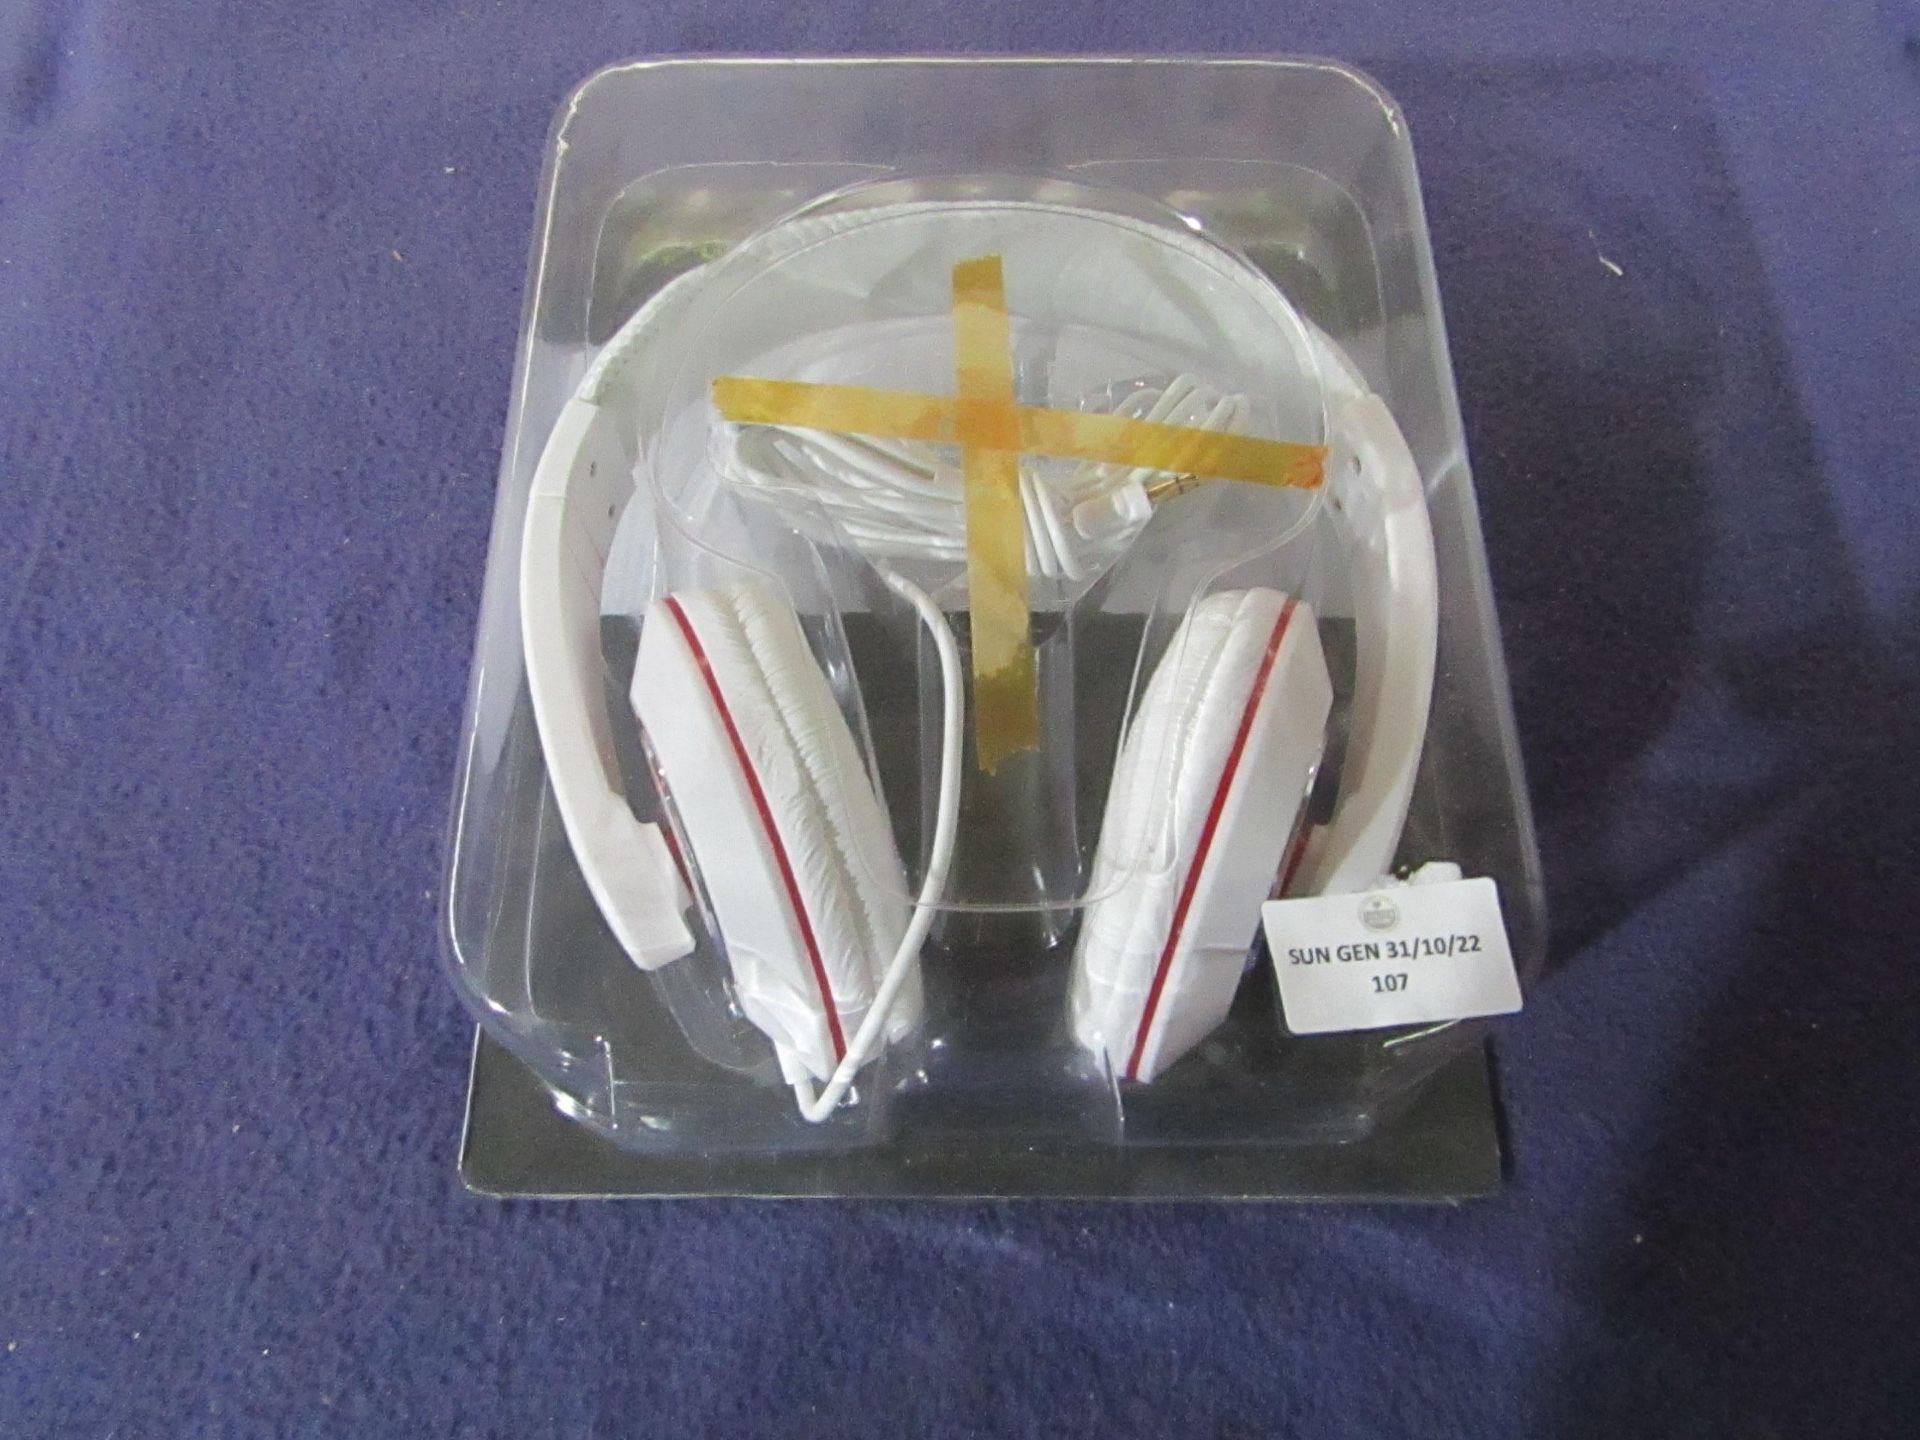 4x QTX Sound - White Stereo HIFI Headphones ( SHW40 ) - Untested & Packaged.